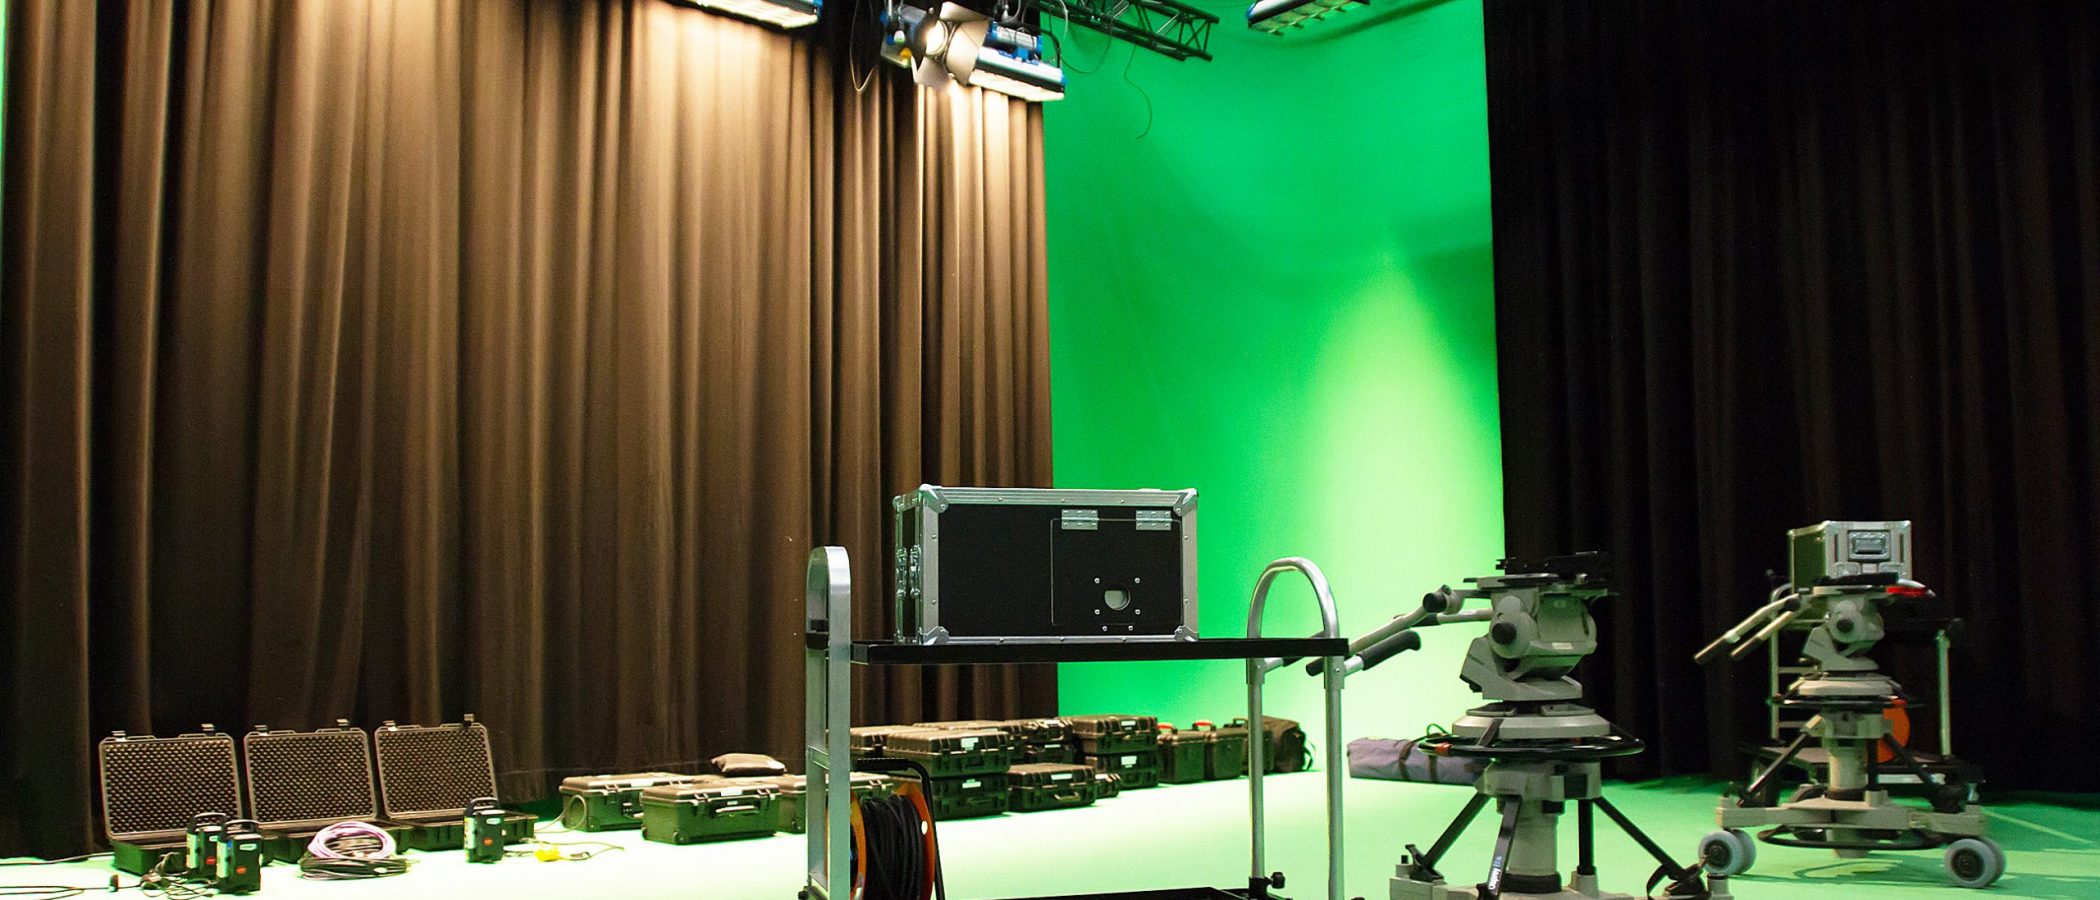 ND Studios Install Lightboard for Lecture Recording, News